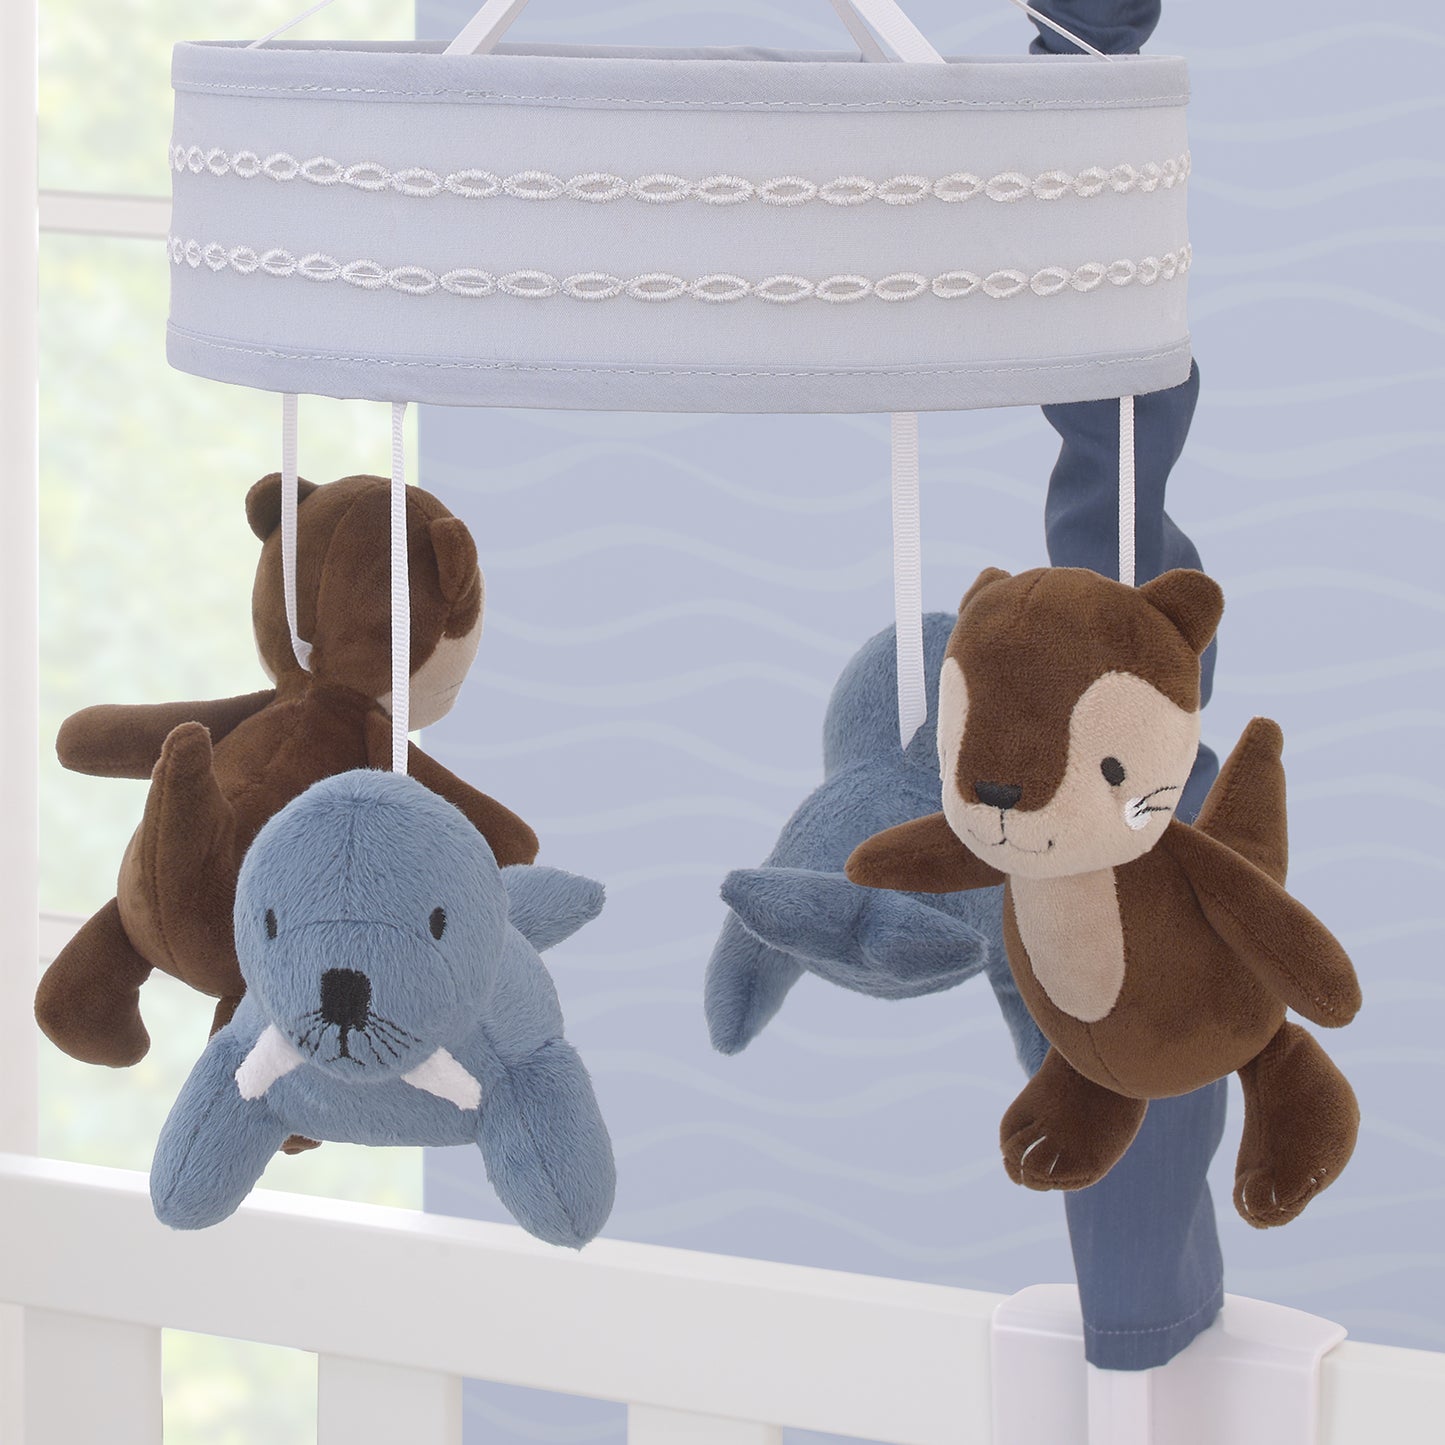 NoJo Arctic Adventure Light Blue and Brown Walrus and Sea Otter Plush Carousel Style Musical Mobile